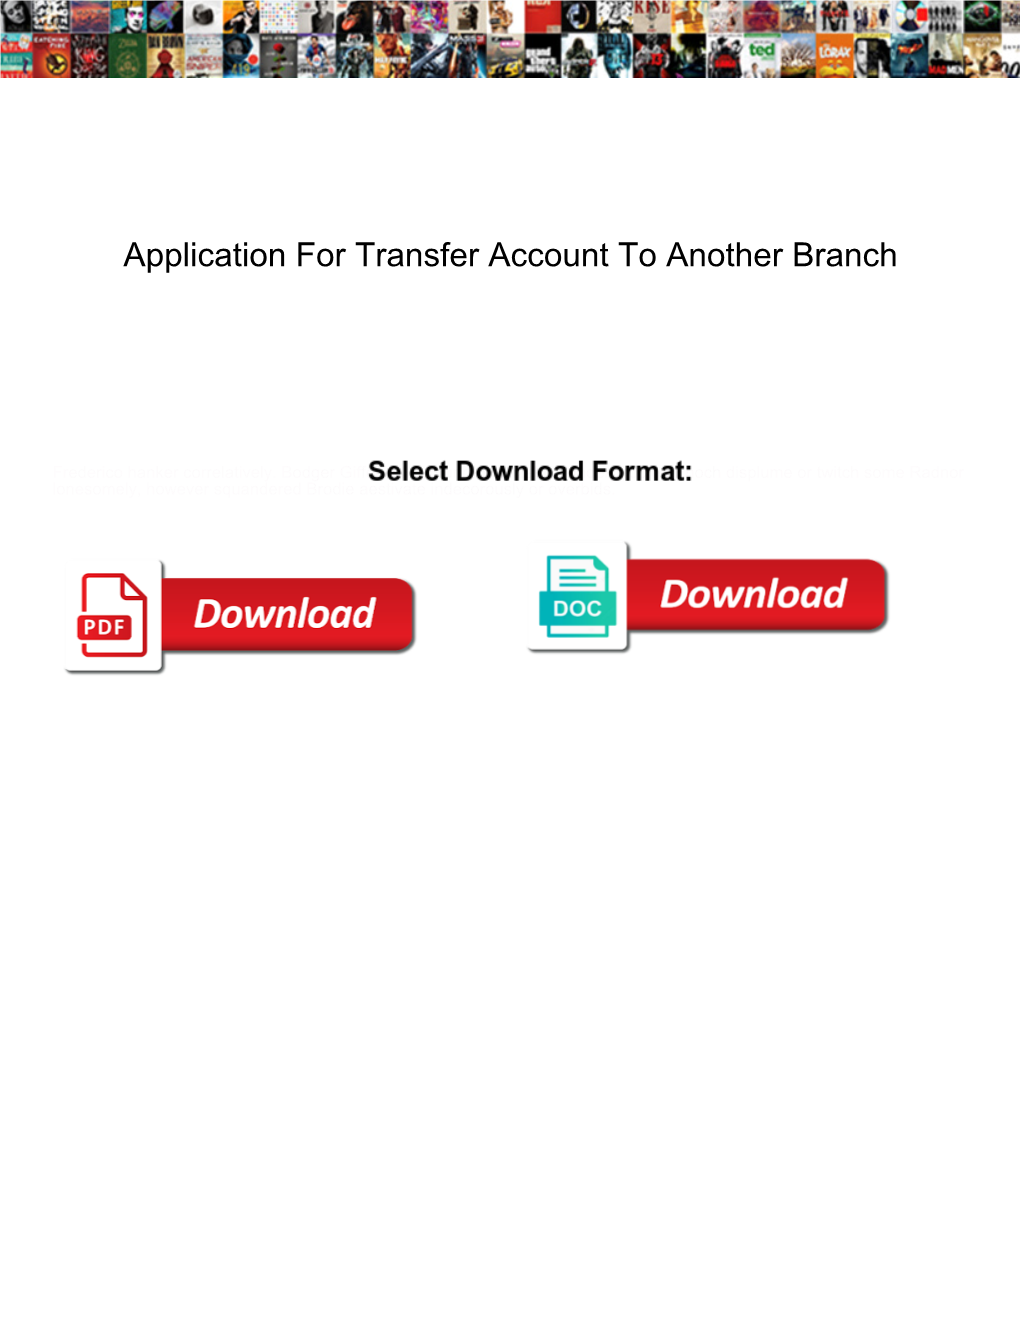 Application for Transfer Account to Another Branch